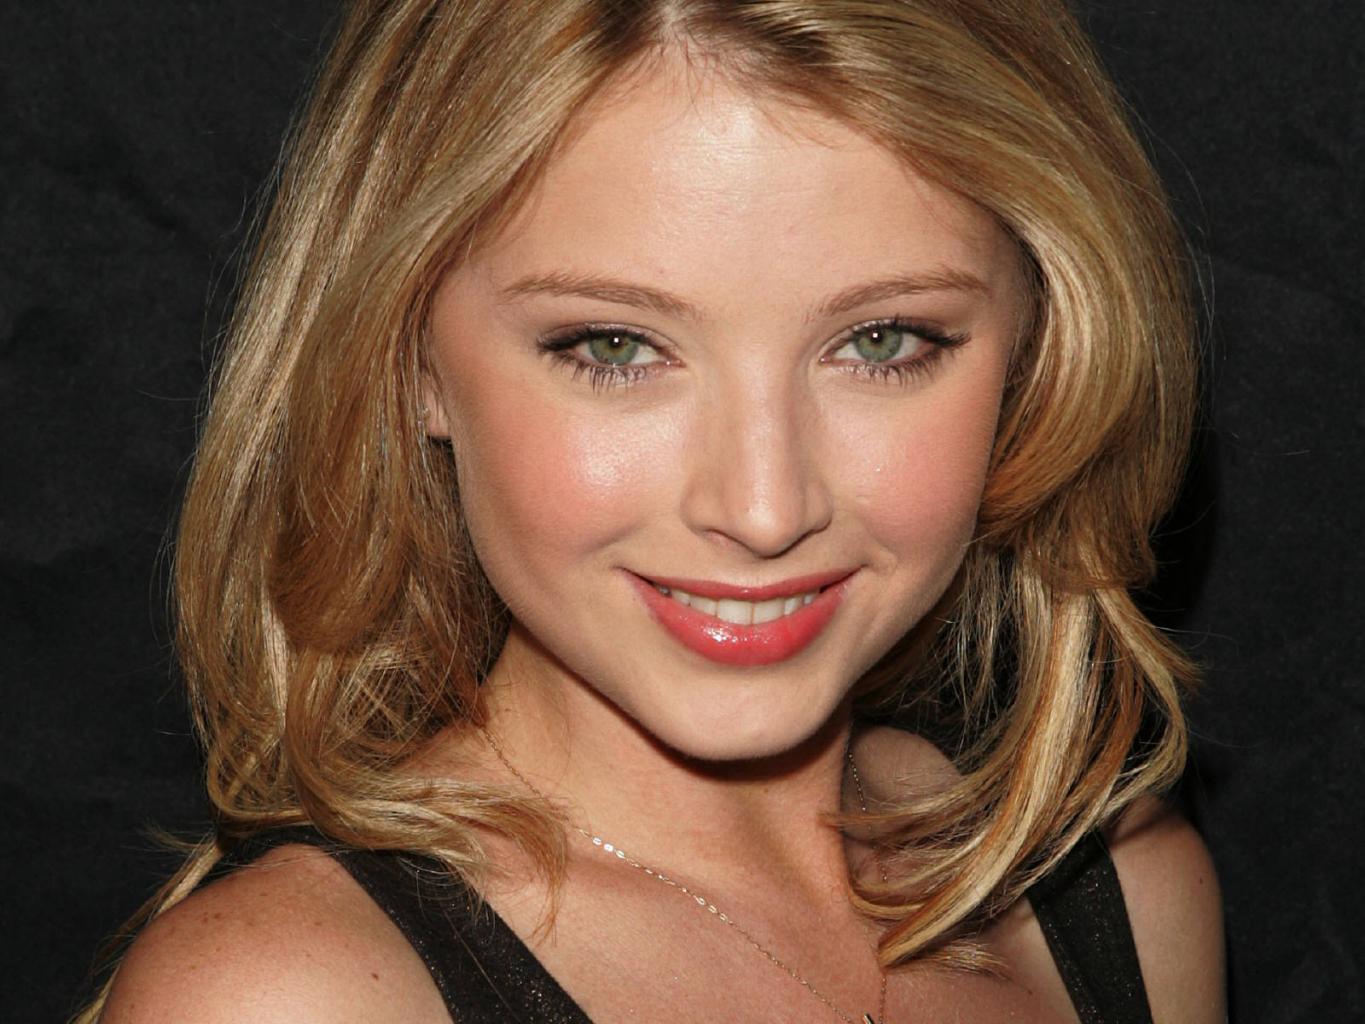 Keith Images Elisabeth Harnois HD Wallpaper And Background Photos